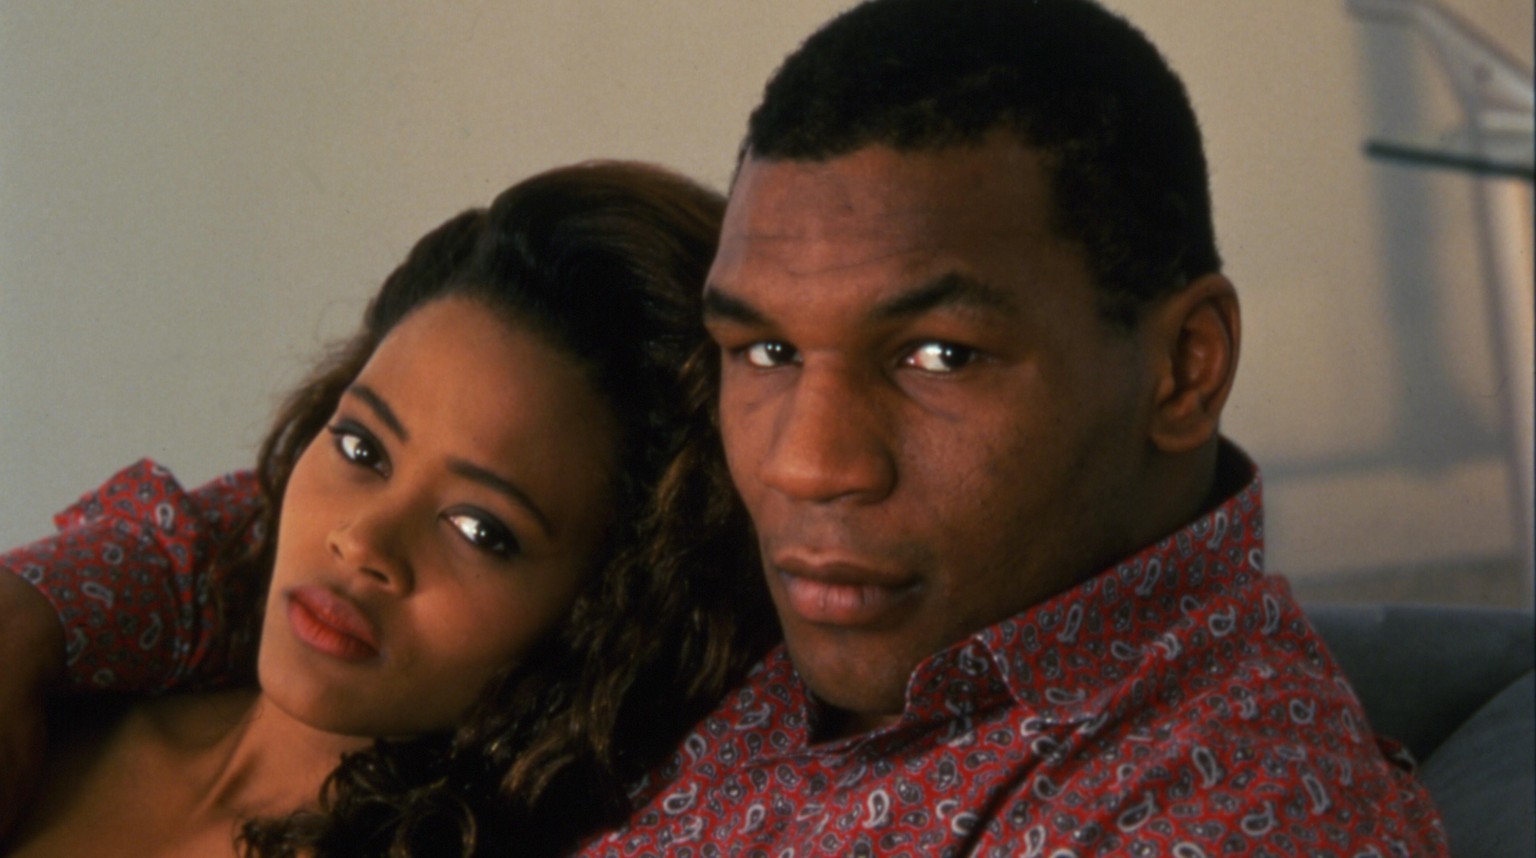 Portrait of American actress Robin Givens and her husband, heavyweight boxer Mike Tyson, as they sit on a sofa, Los Angeles, California, May 1988. (Photo by Anthony Barboza/Getty Images)